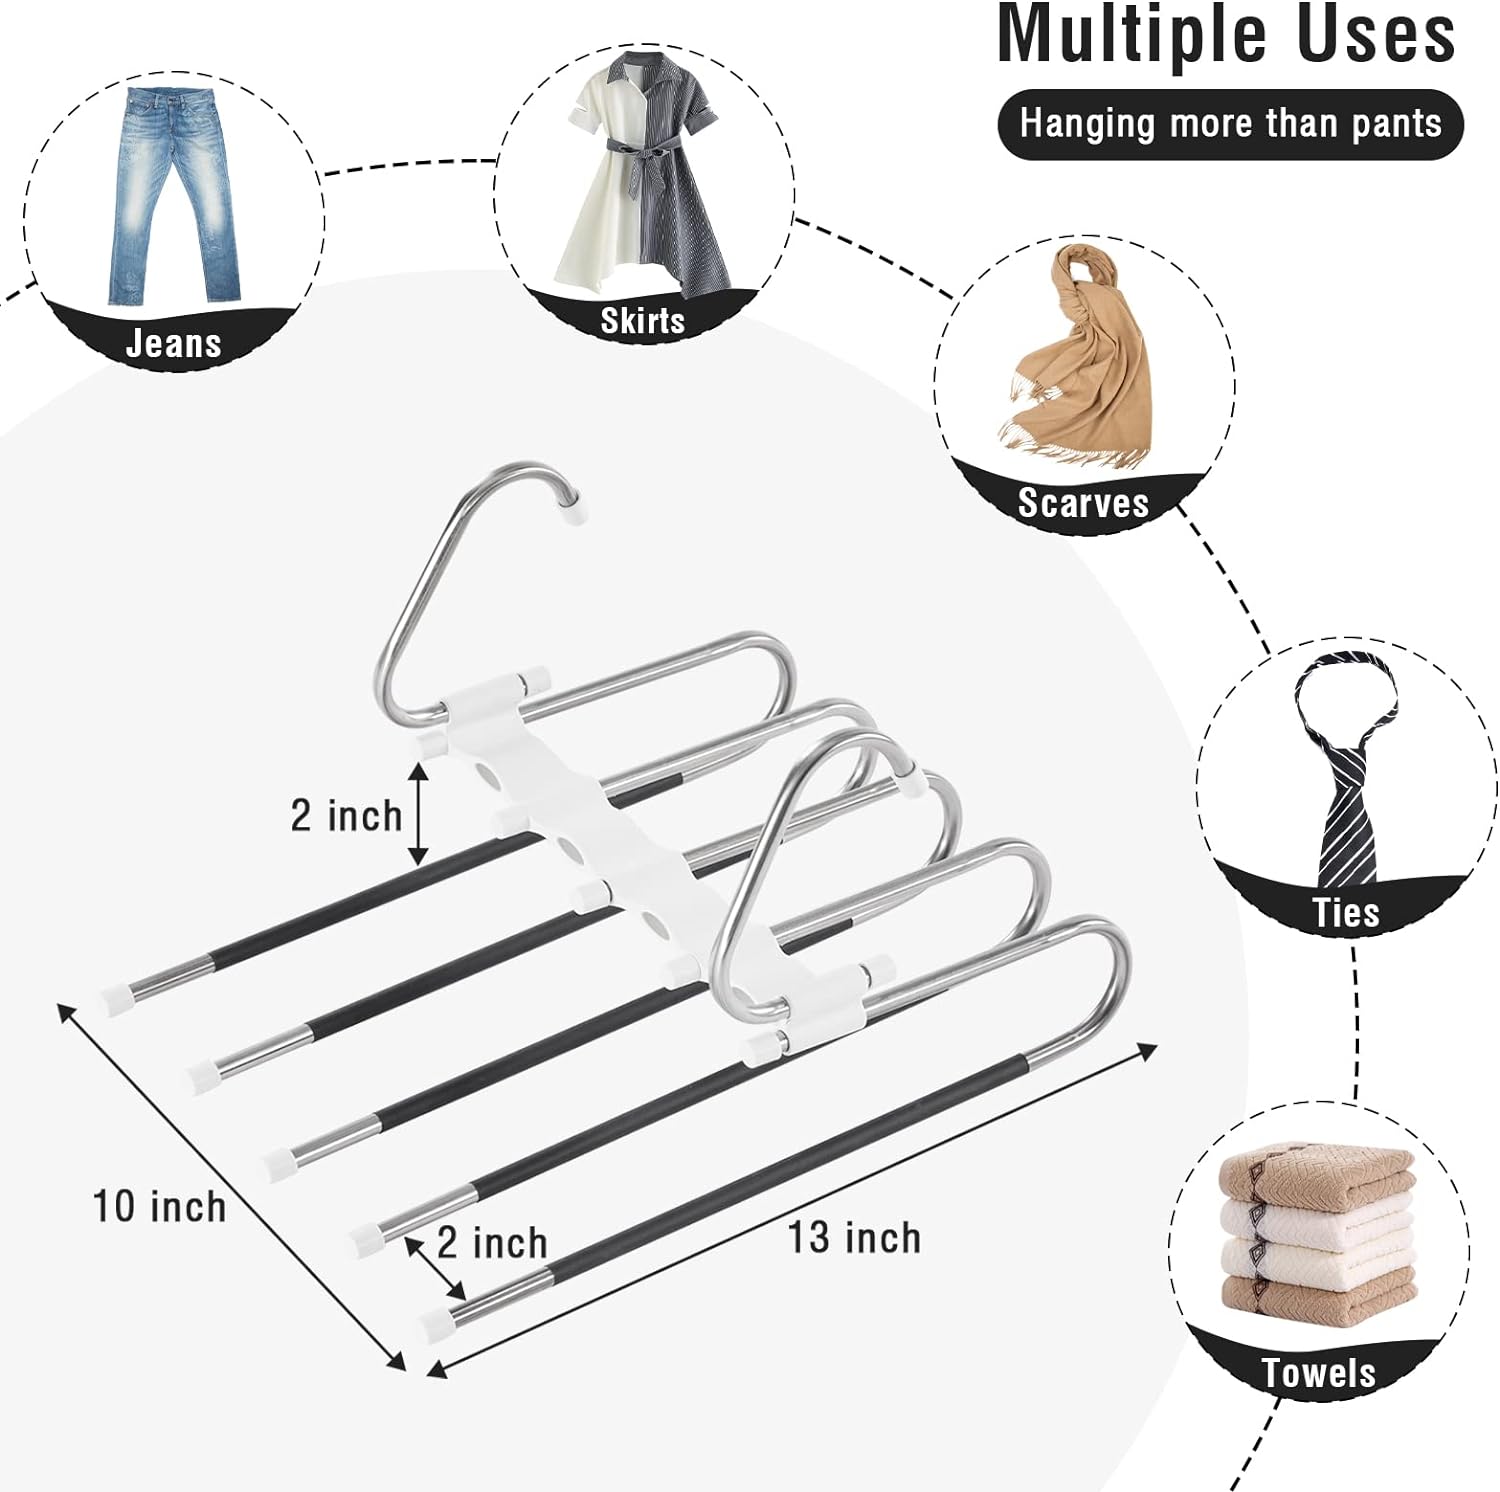 5-in-1 Foldable Space Saving Cloth Hanger